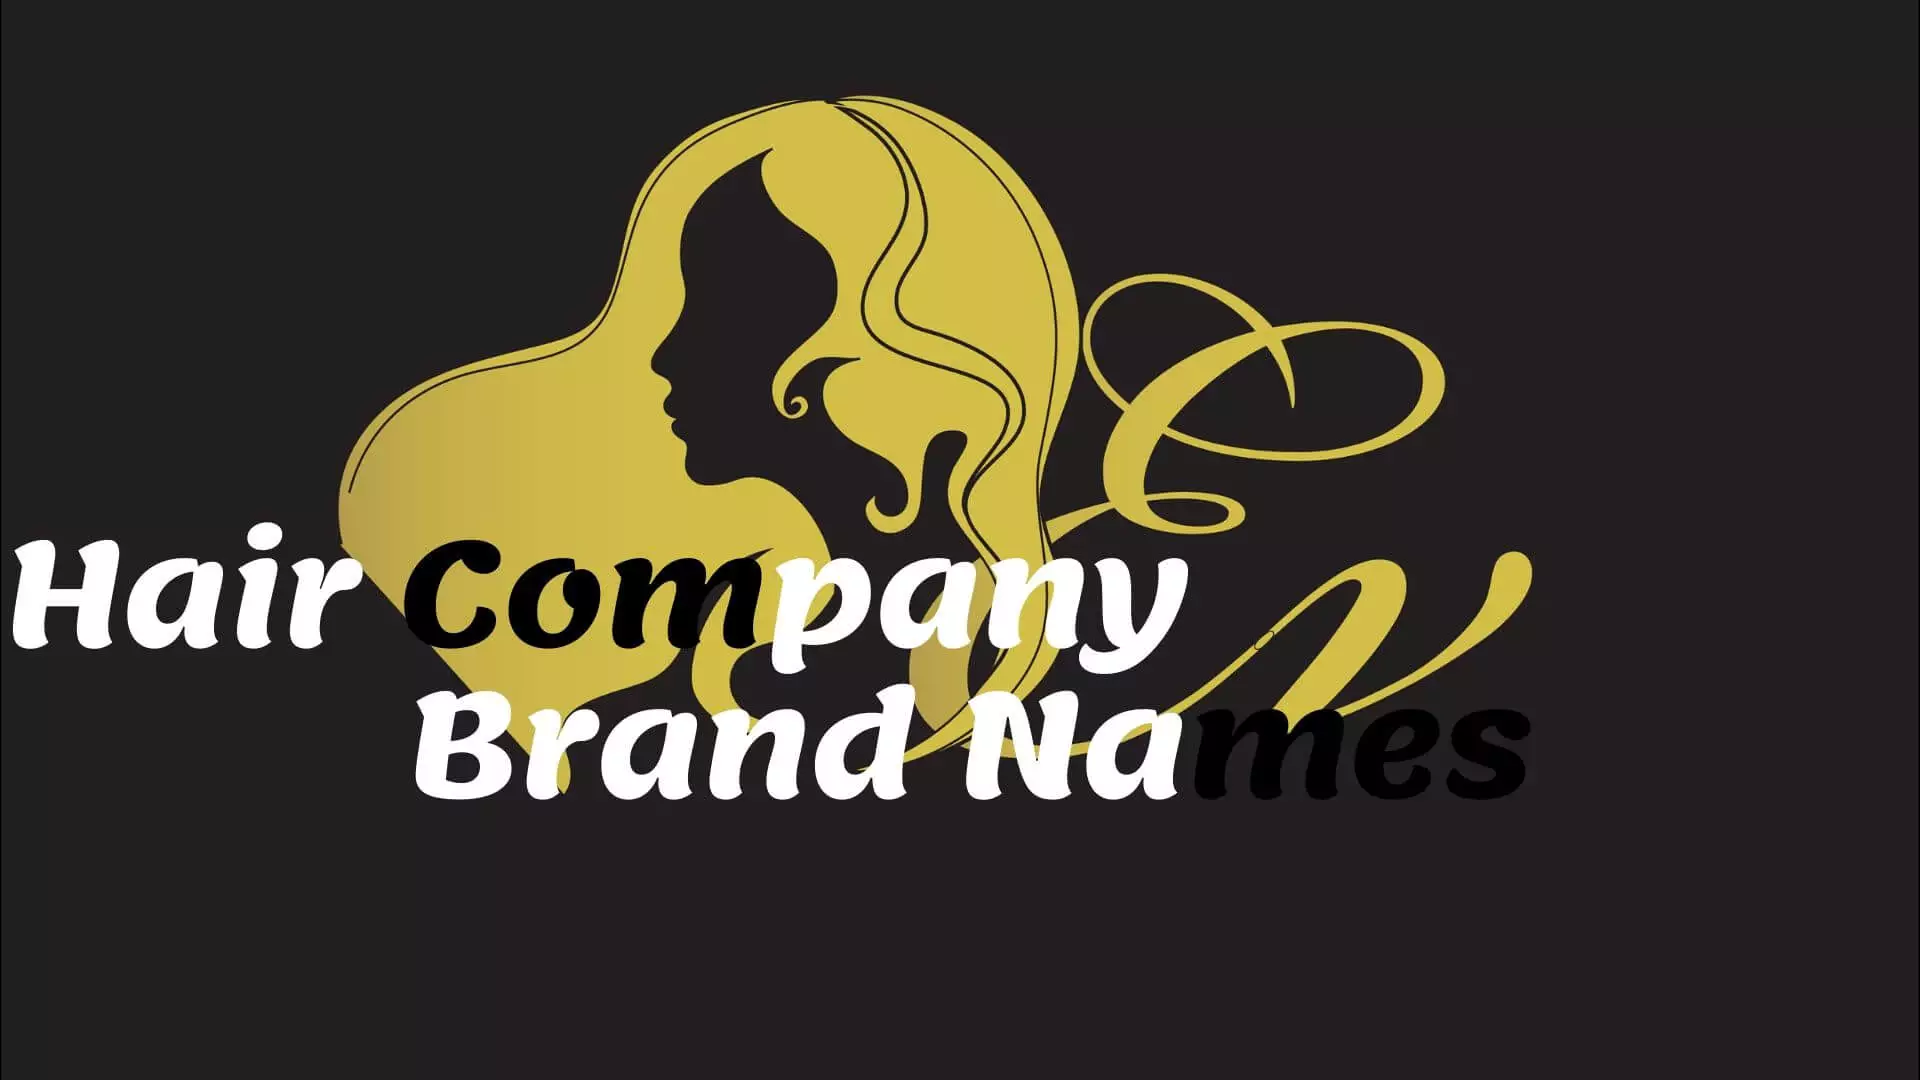 Hair Company Brand Name Ideas & Suggestions